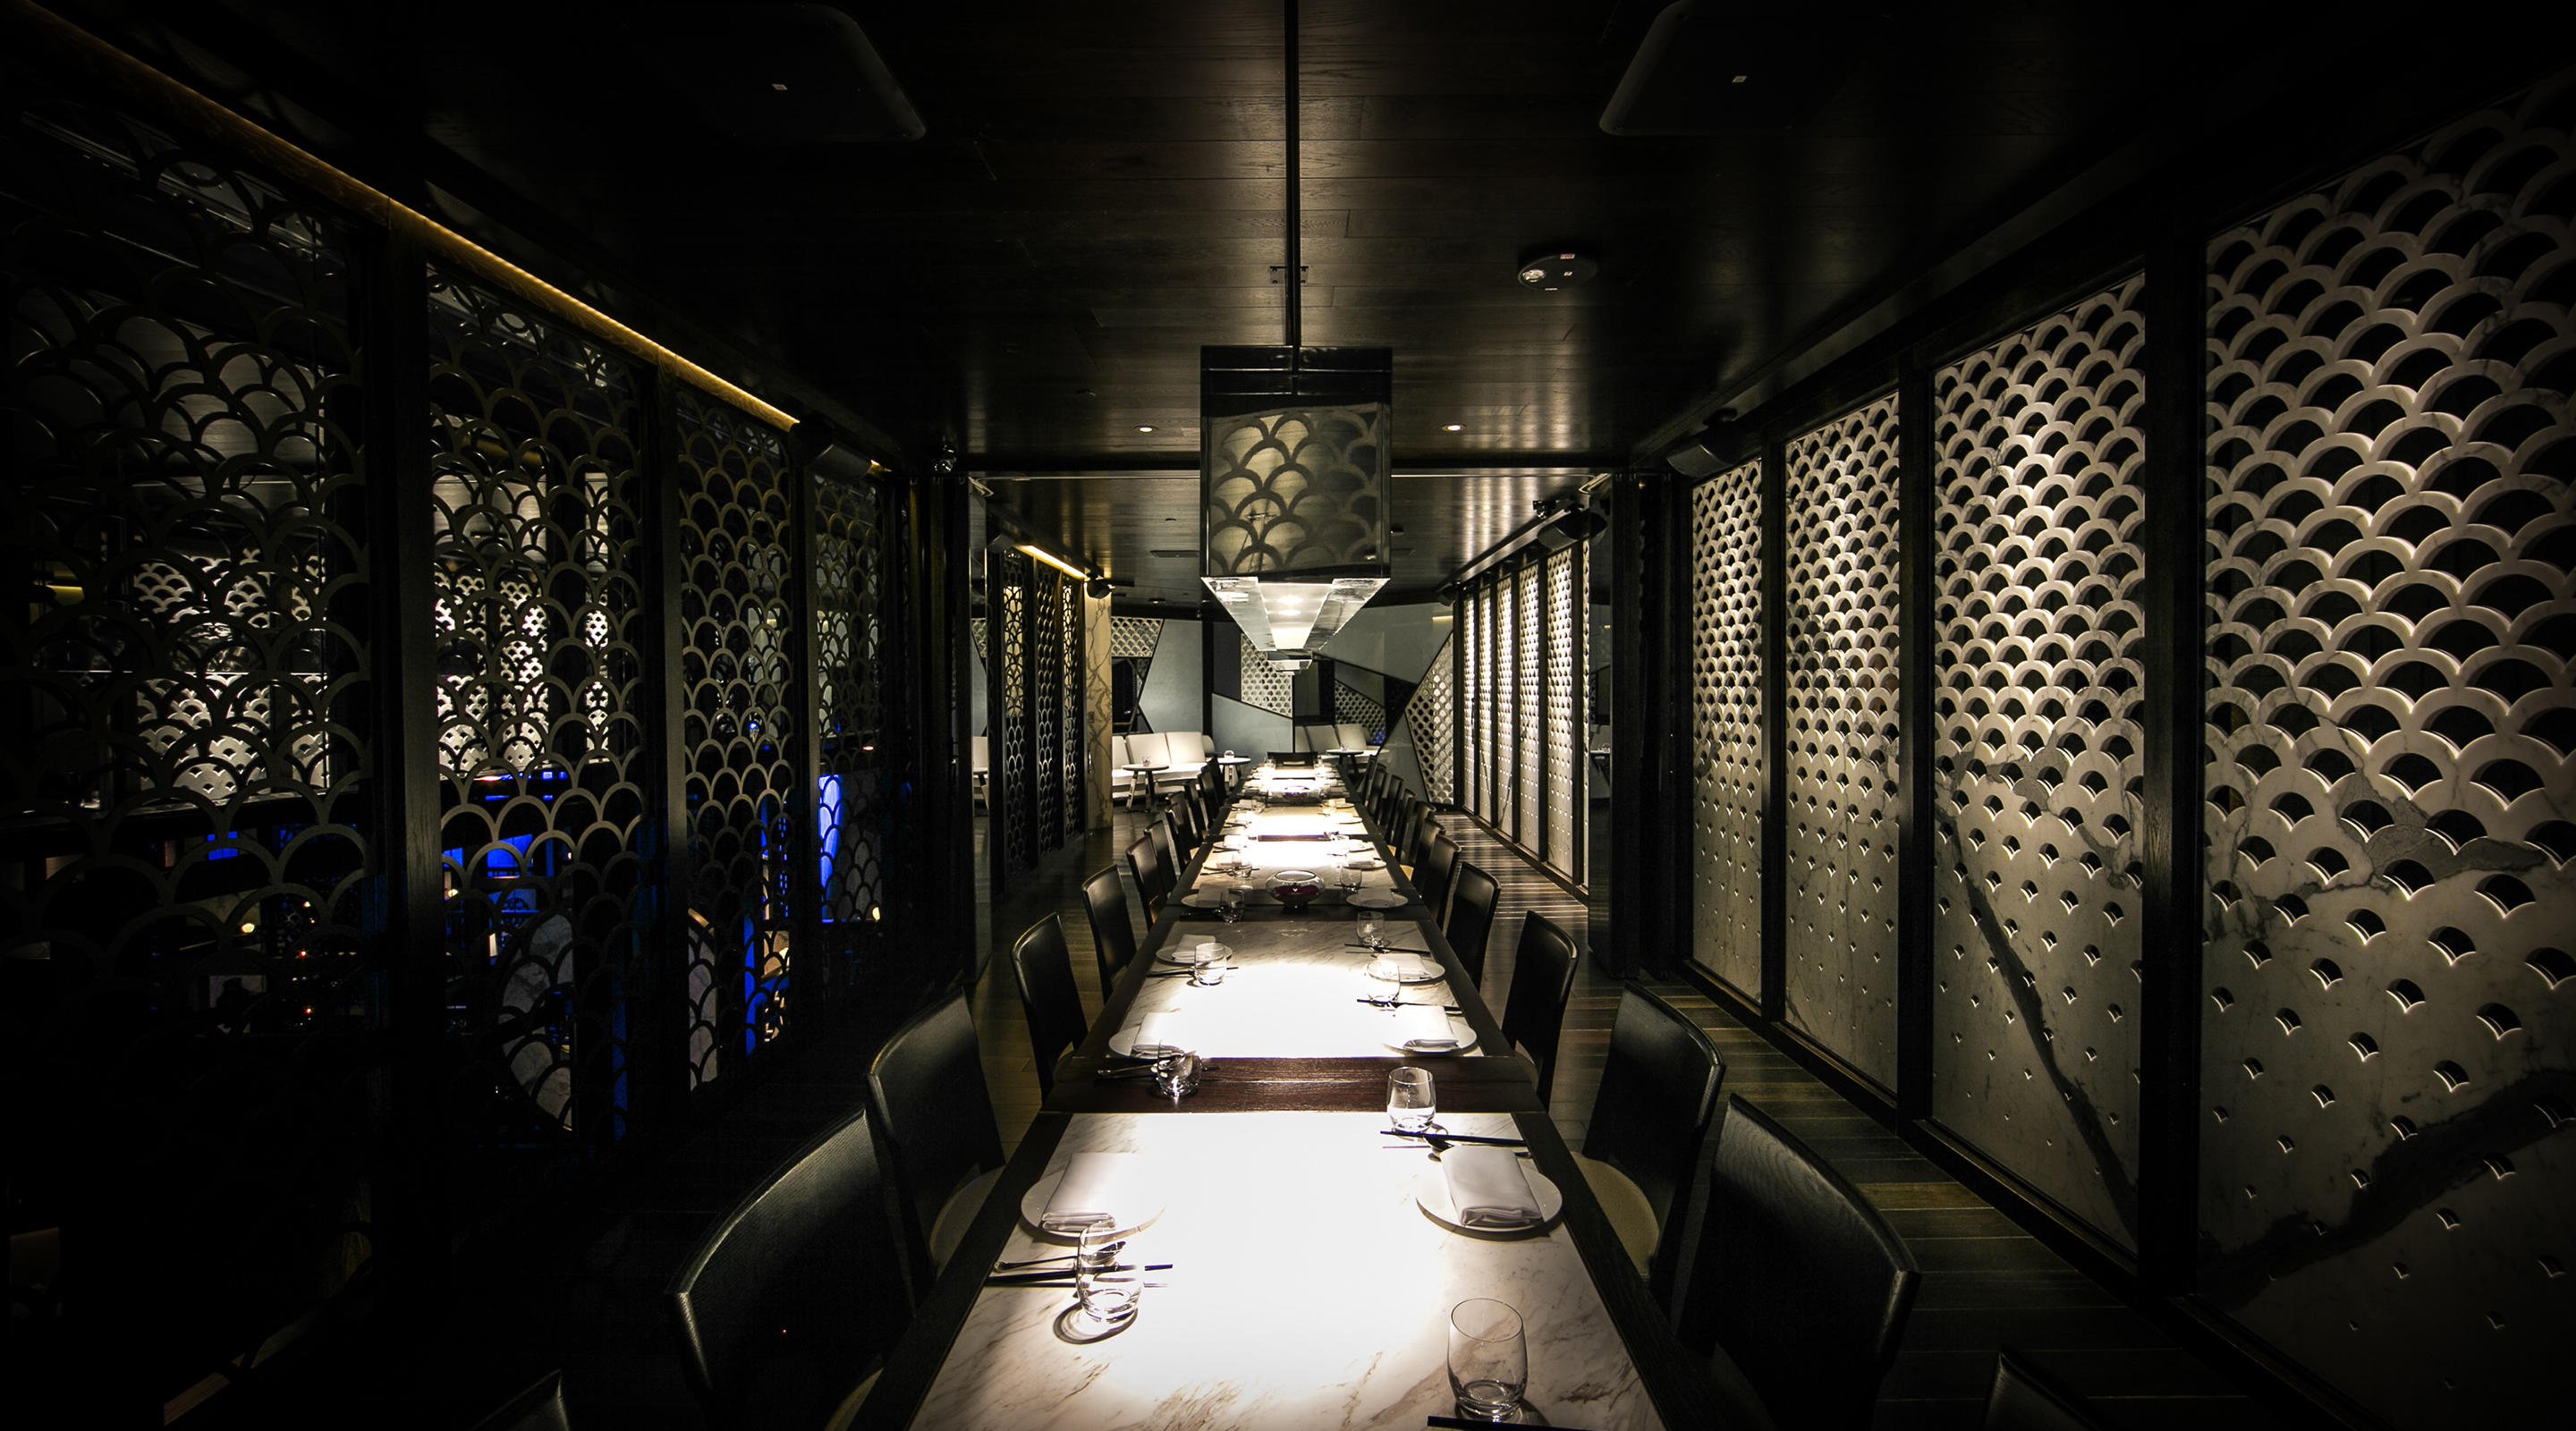 View of a private dining room in Hakkasan Restaurant.